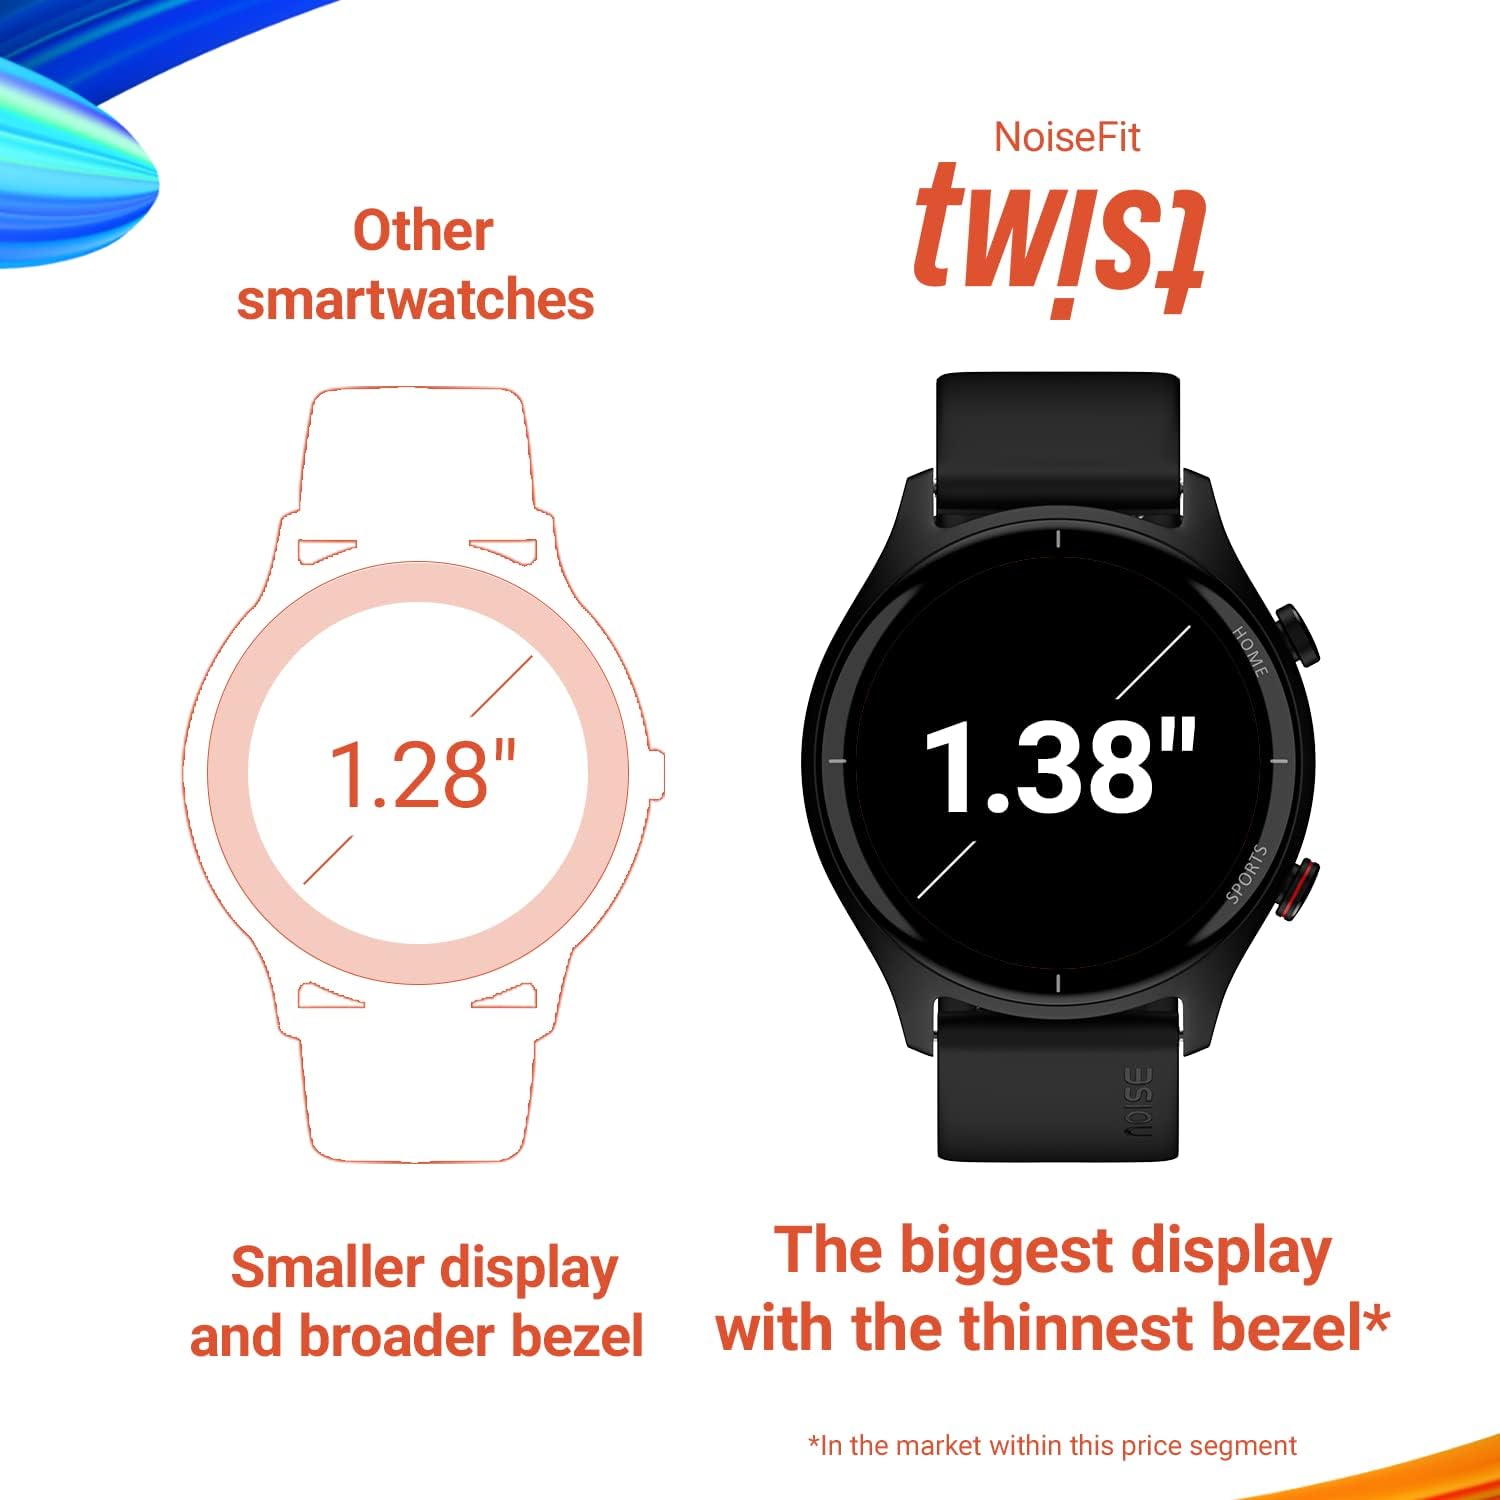 Noise Newly Launched Twist Round Dial Smart Watch with Bluetooth Calling, 1.38" TFT Display, Up-to 7 Days Battery, 100+ Watch Faces, IP68, Heart Rate Monitor, Sleep Tracking (Silver Grey)